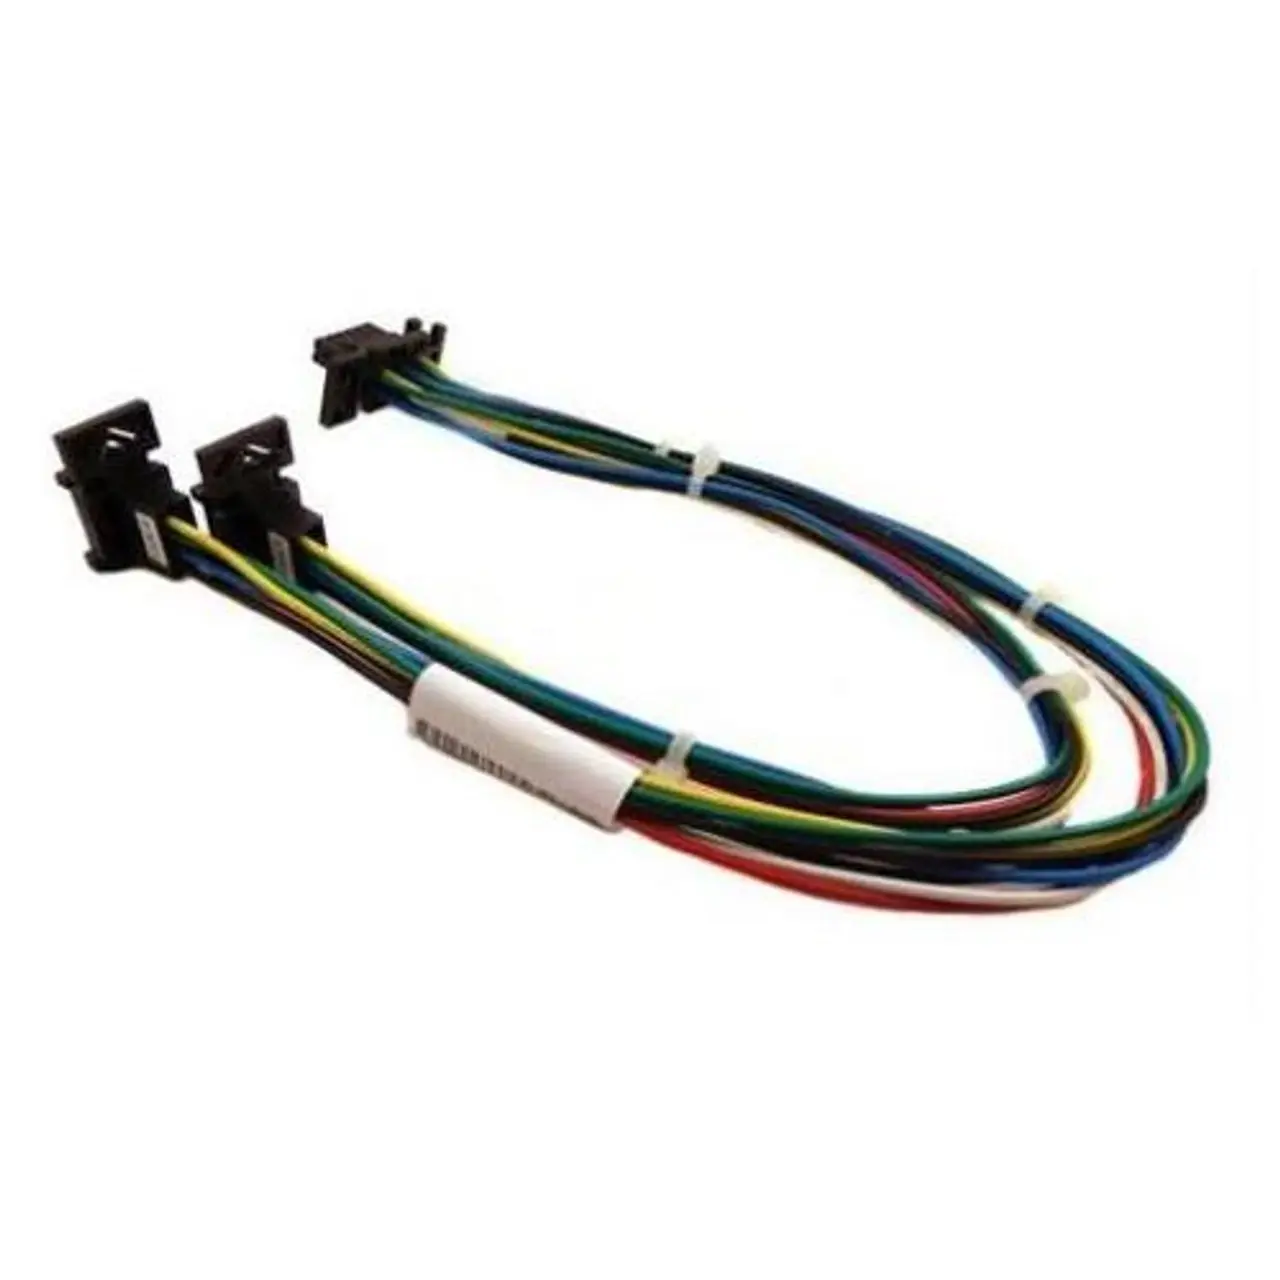 0RW104 Dell 2xUSB Cable with I/O Front Panel Assembly for XPS 730